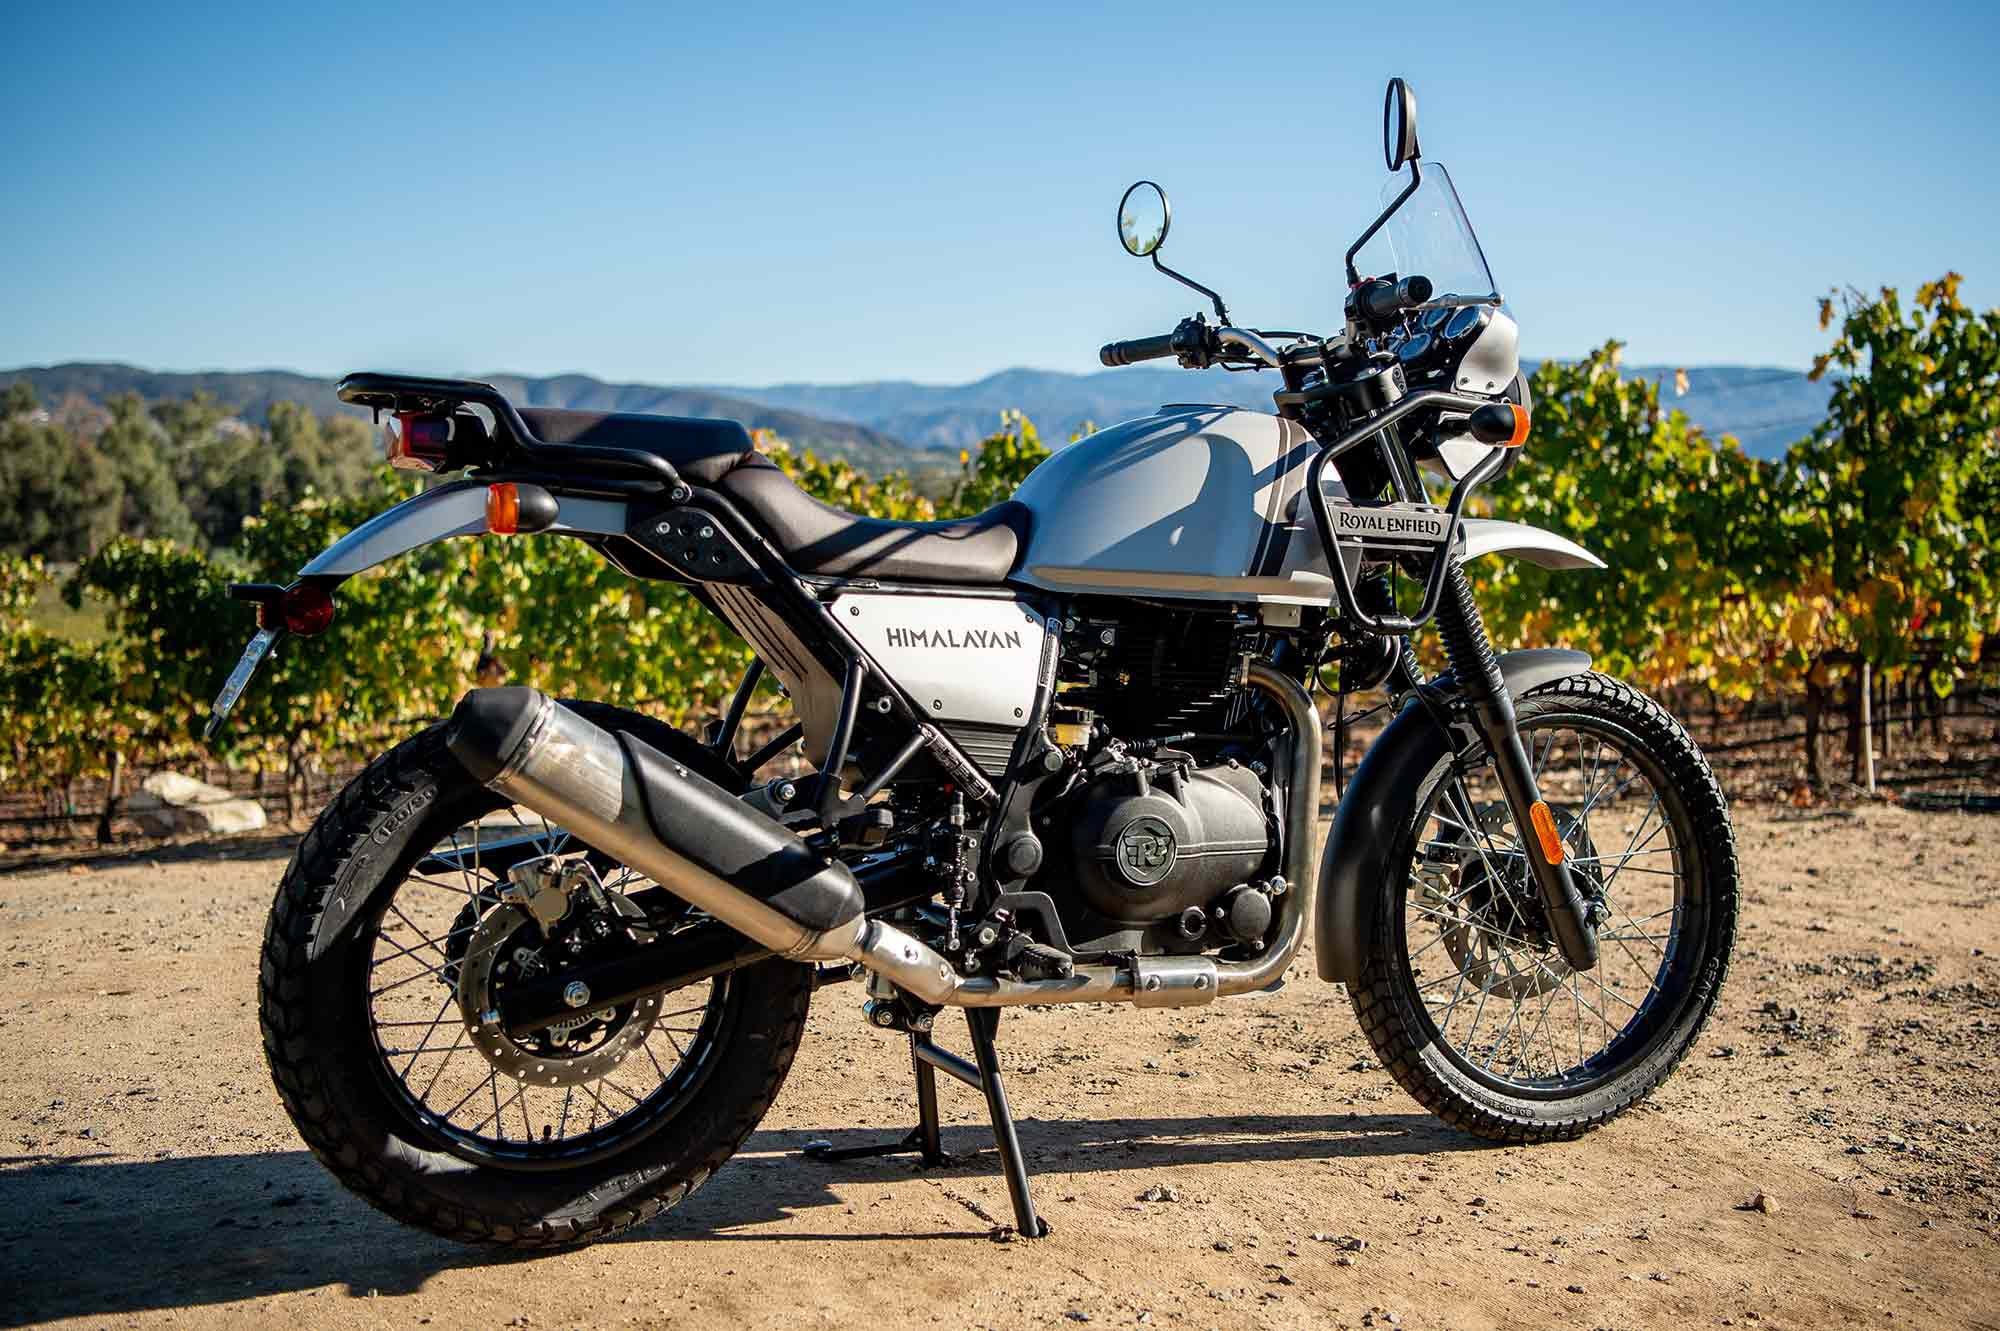 The Himalayan looks the part of adventure with a rally styled front end, contoured seat, high pipe, and front and rear racks.